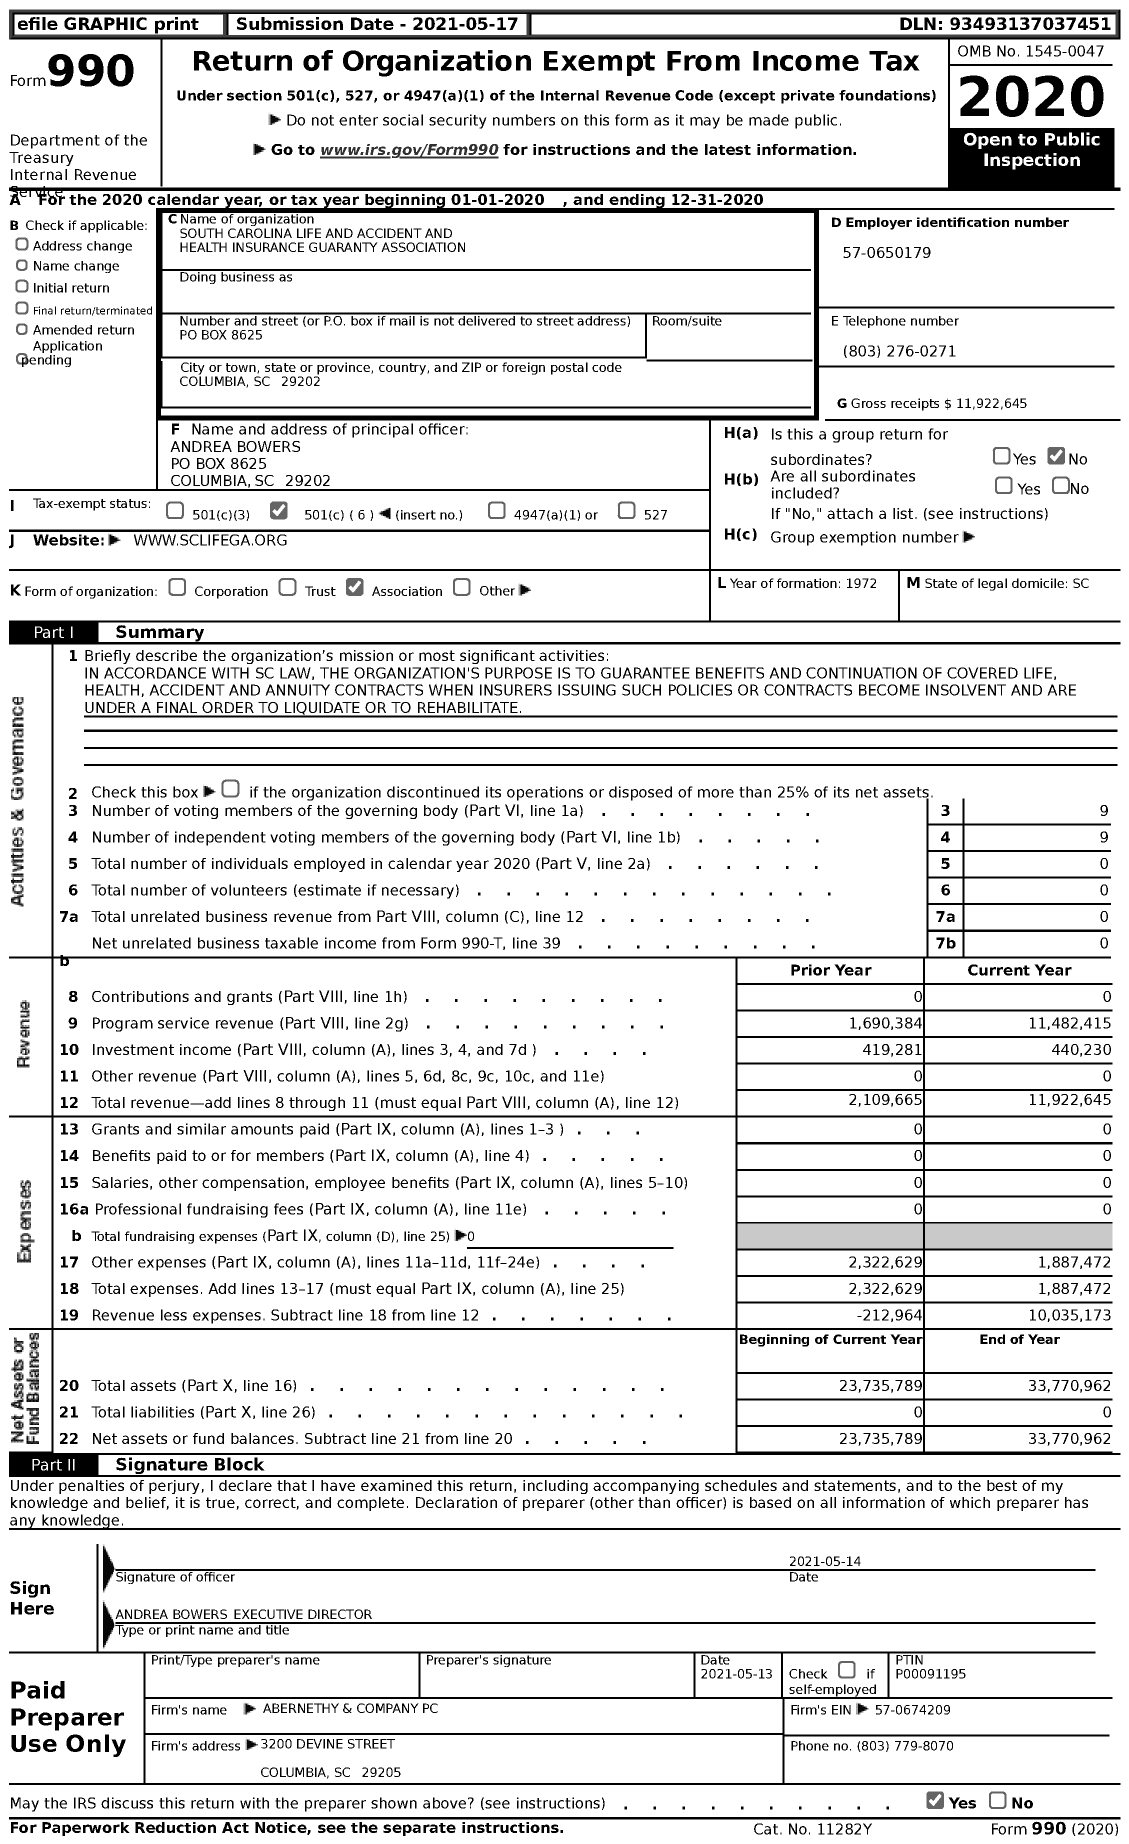 Image of first page of 2020 Form 990 for South Carolina Life and Accident and Health Insurance Guaranty Association (SCLIFEGA)